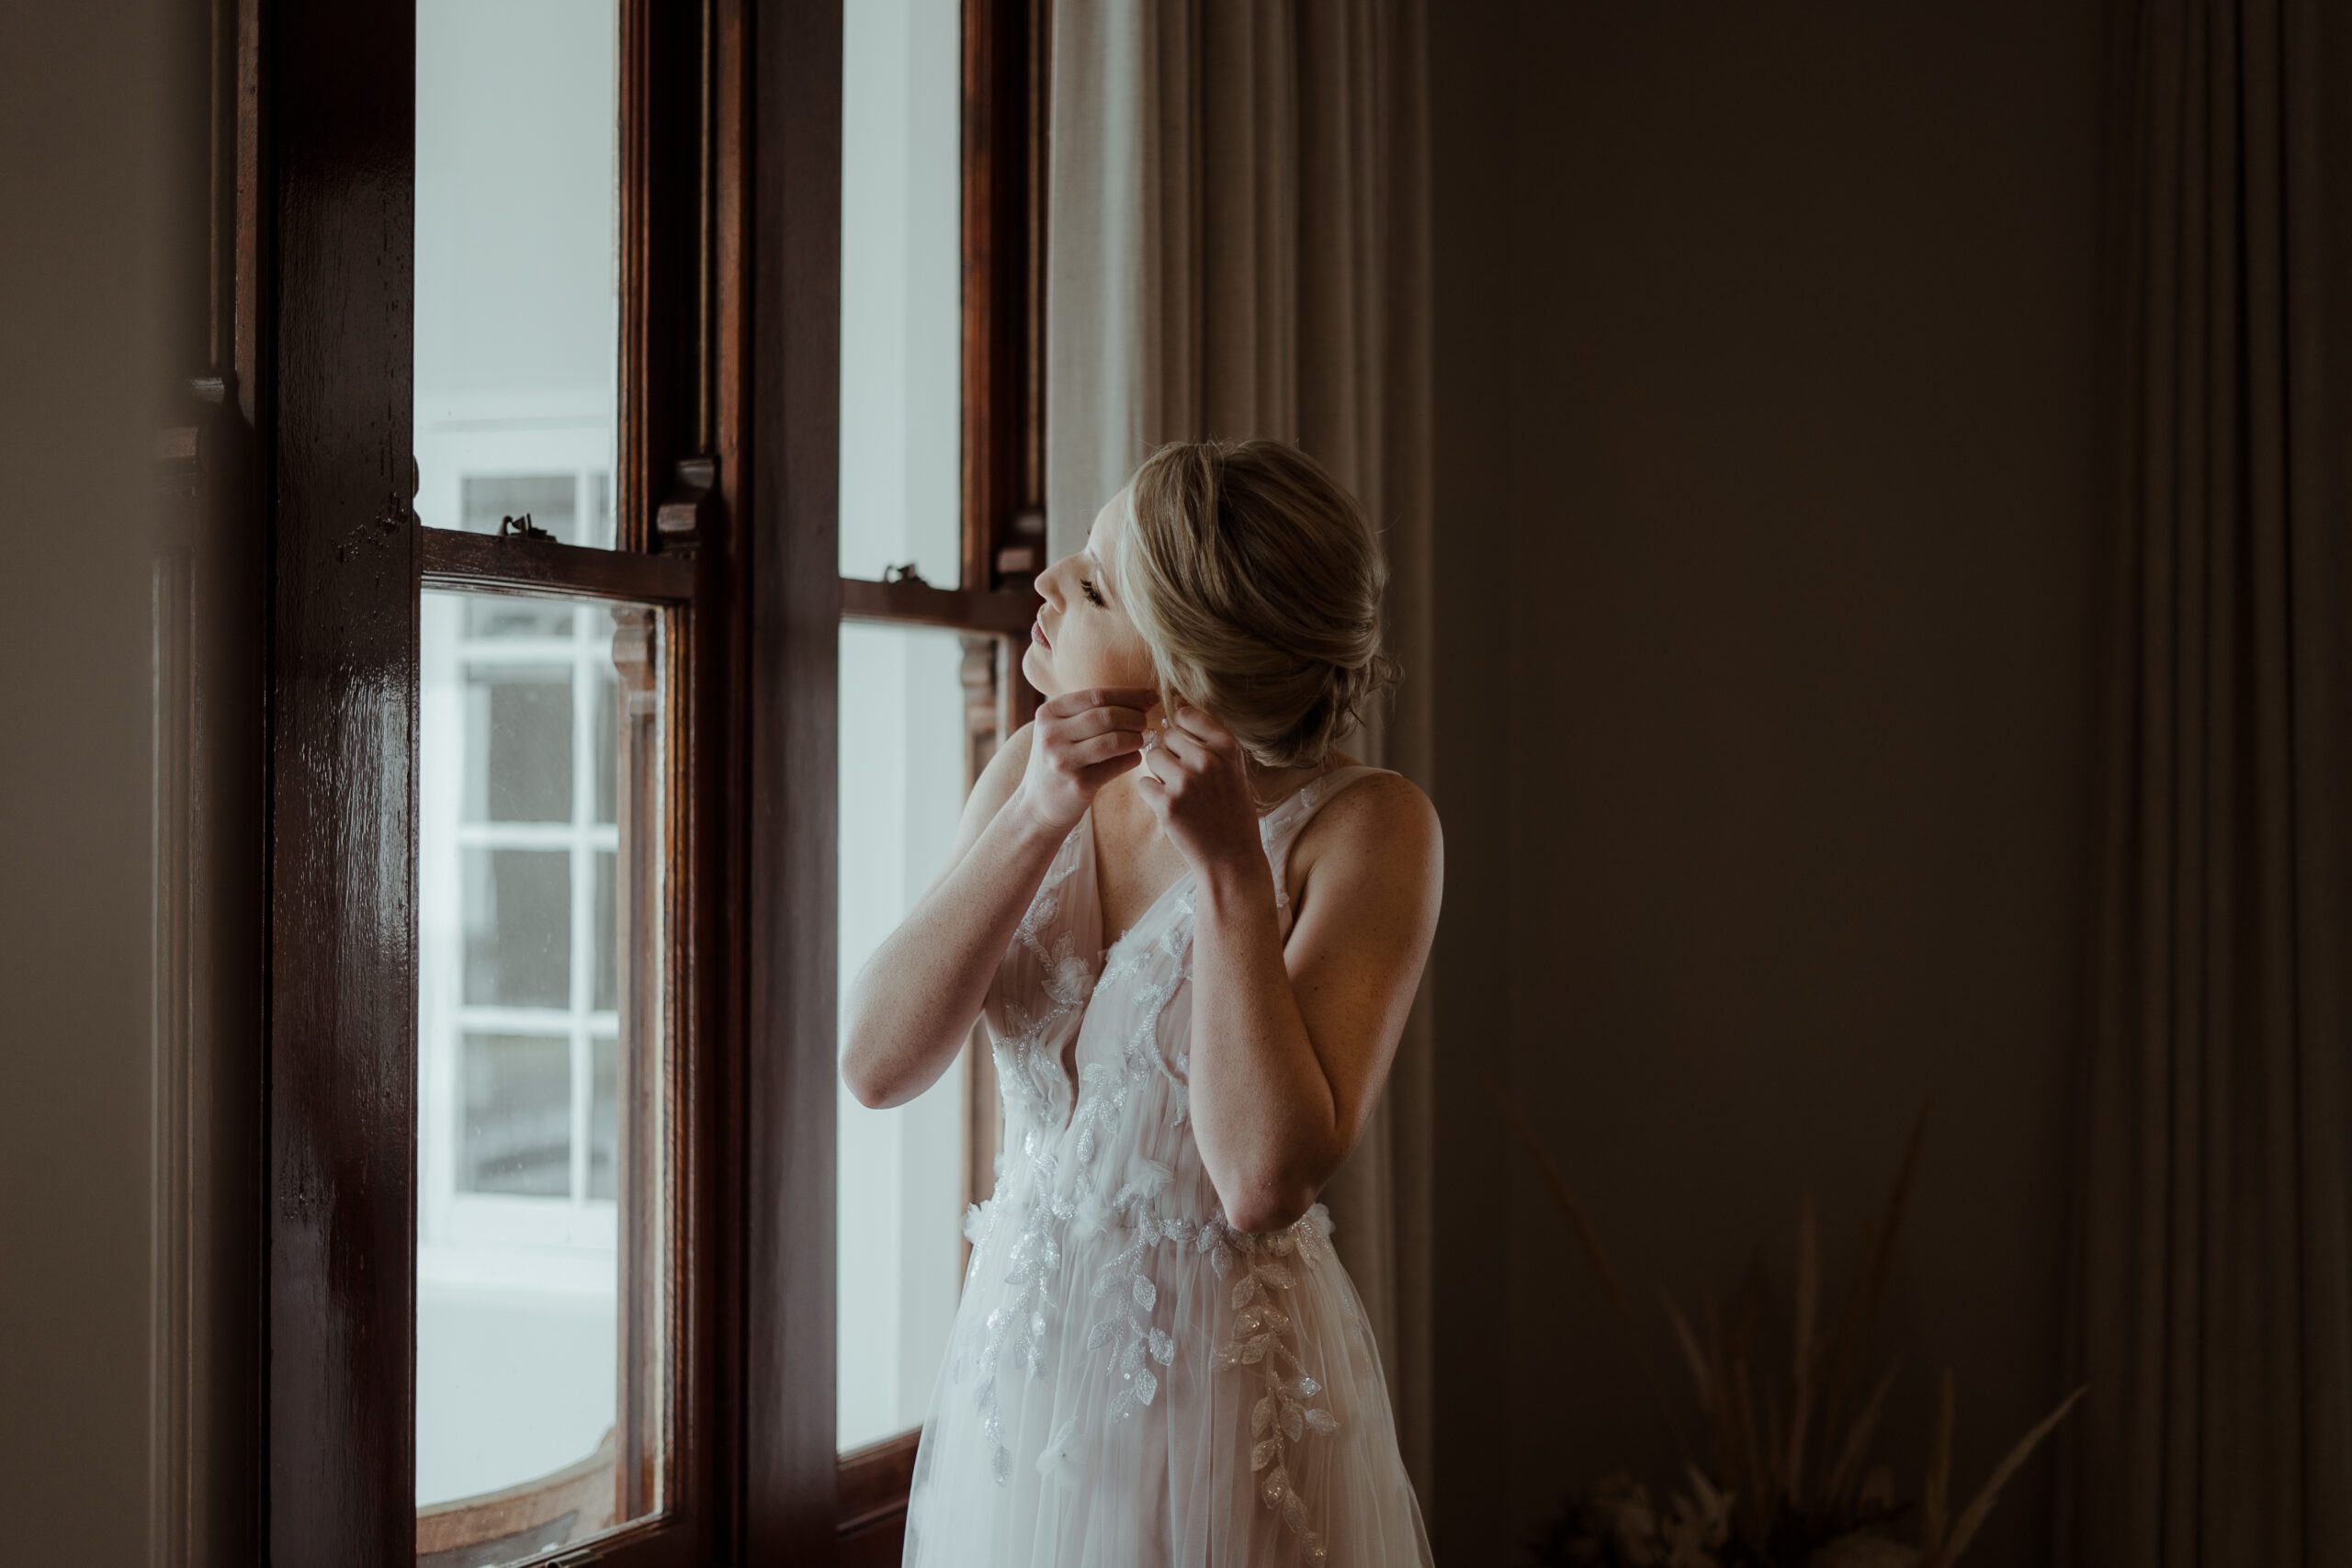 A beautiful shot of a bride getting ready for her wedding